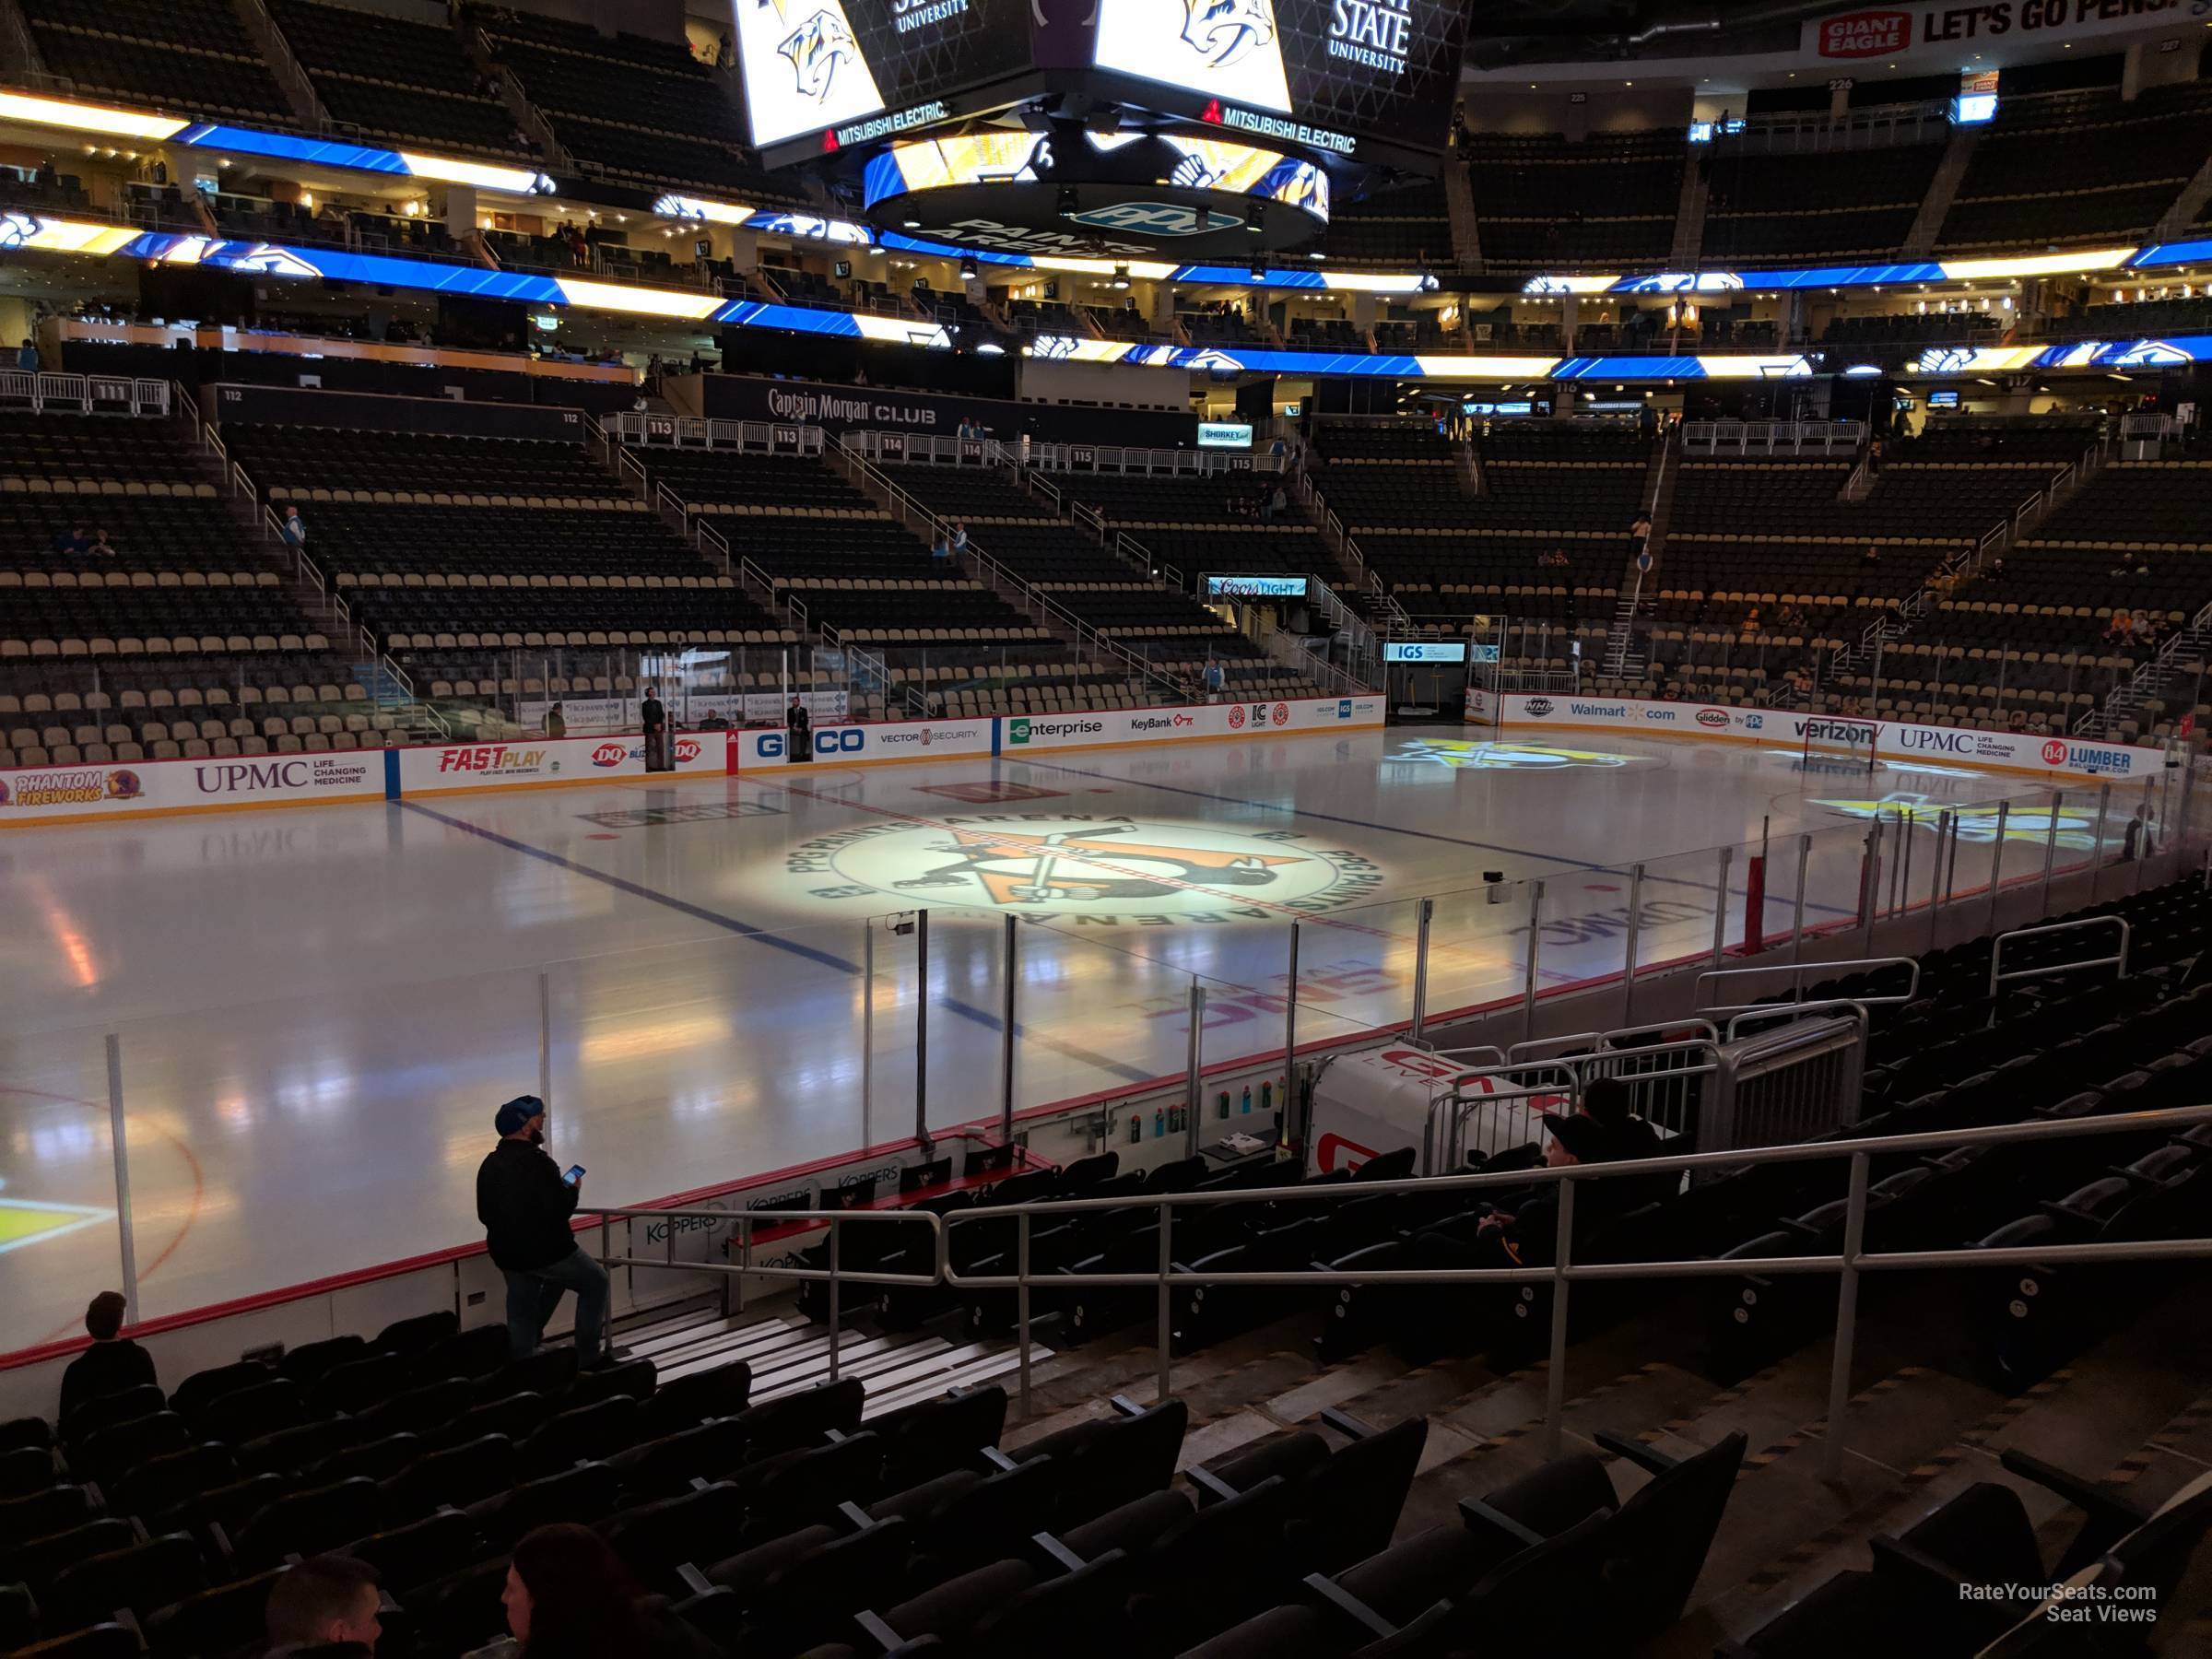 Loge Box 14 at PPG Paints Arena 